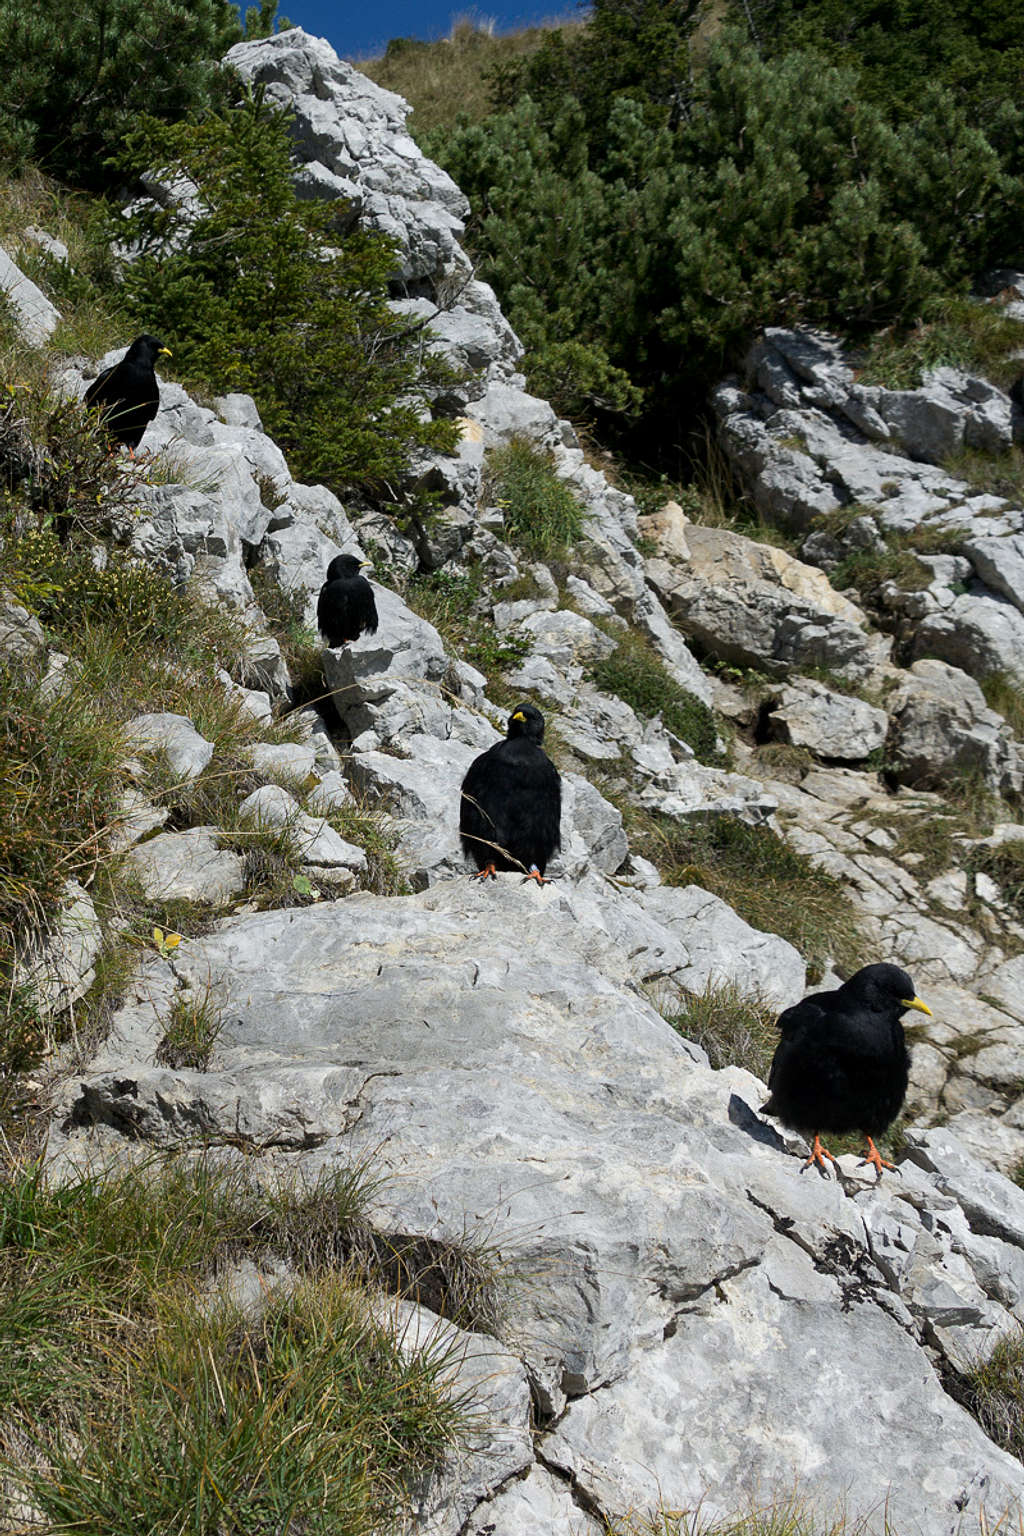 Your friendly scavenger choughs